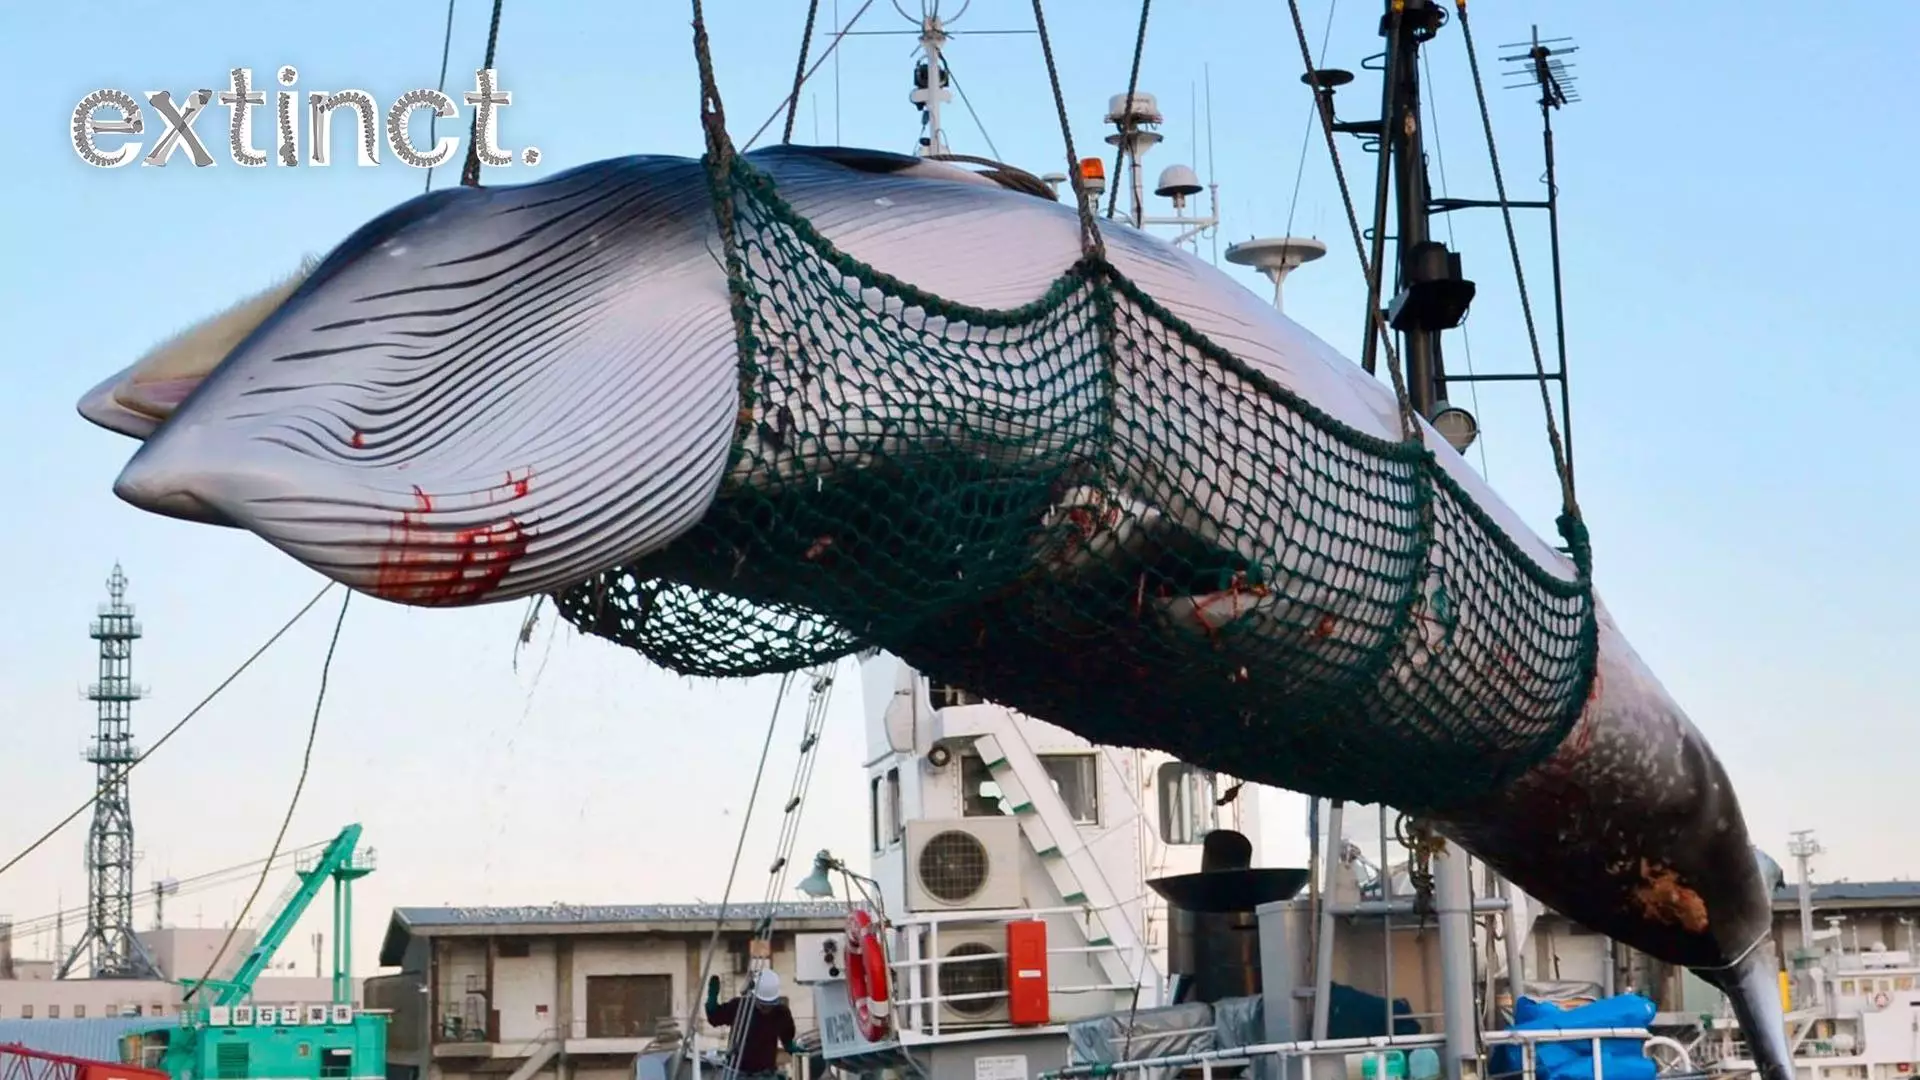 Japan Set To Start Commercial Whale Hunting Again In 2019 After 30 Years